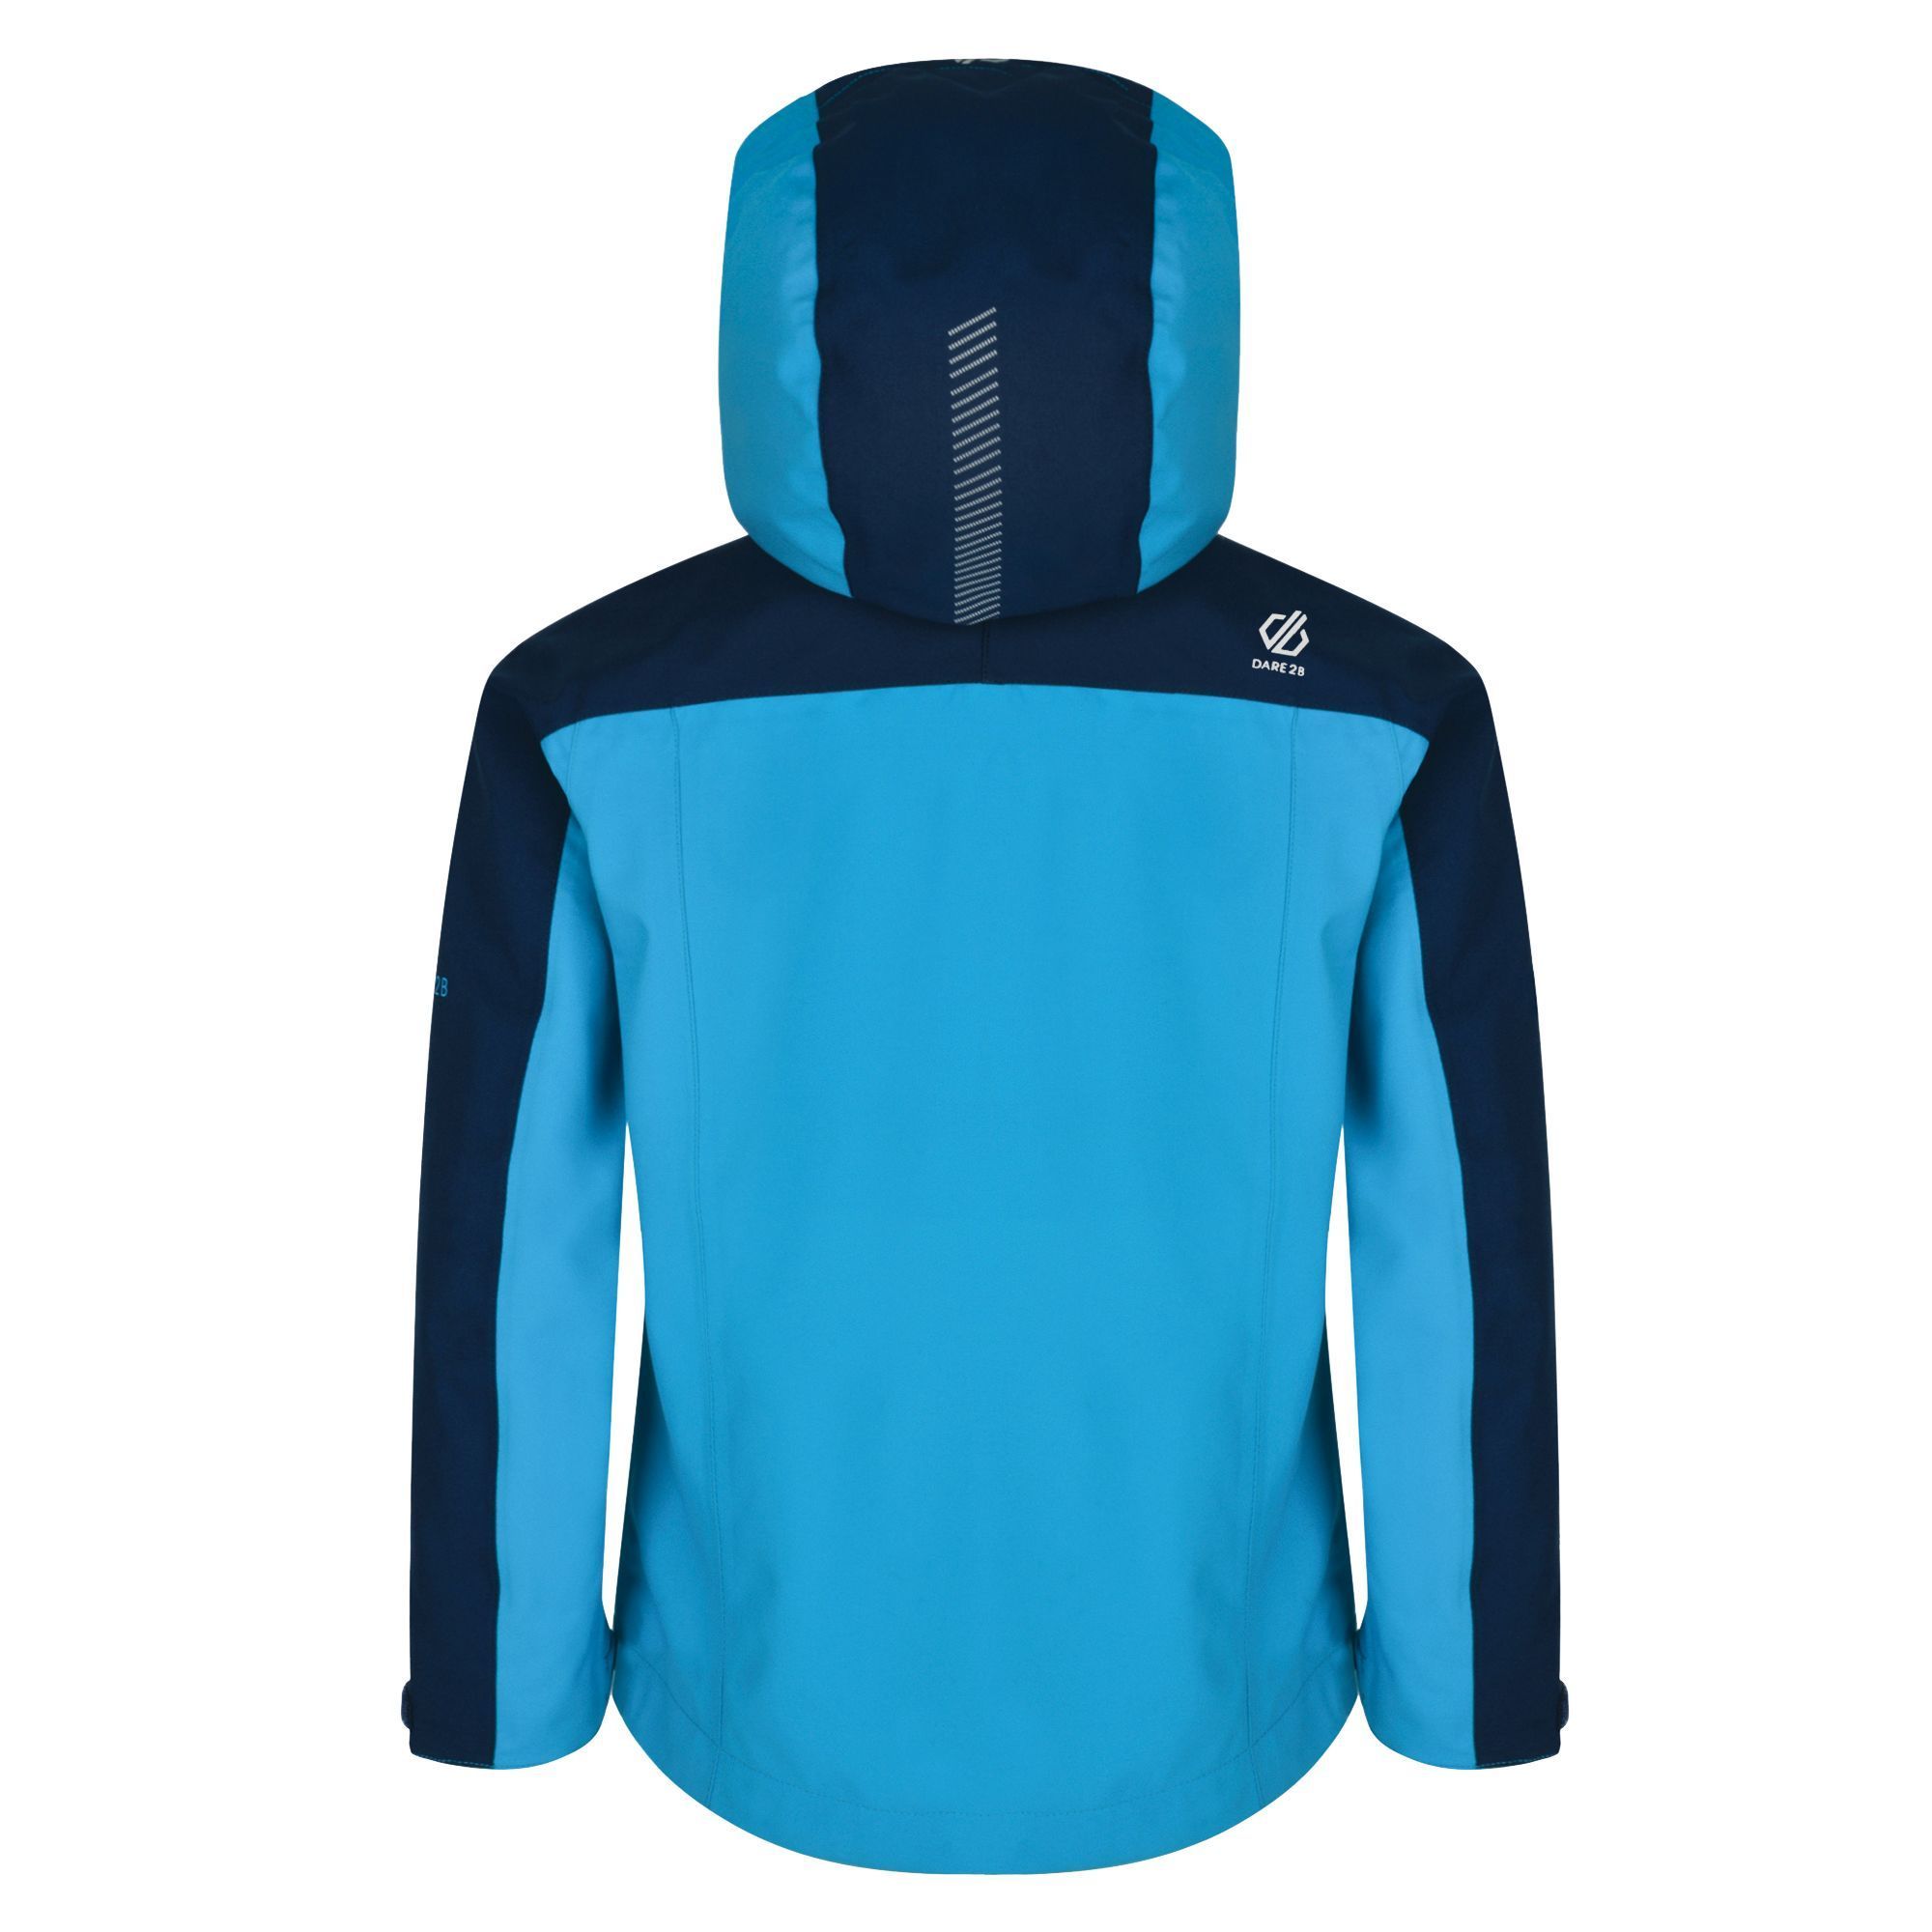 100% Polyester; Ared V02 20000 Oxford polyester 4-way stretch fabric. Grown on technical hood with high collar and elastication and roll away hood function. 2 x zipped lower pockets. Reflective detail for enhanced visibility.